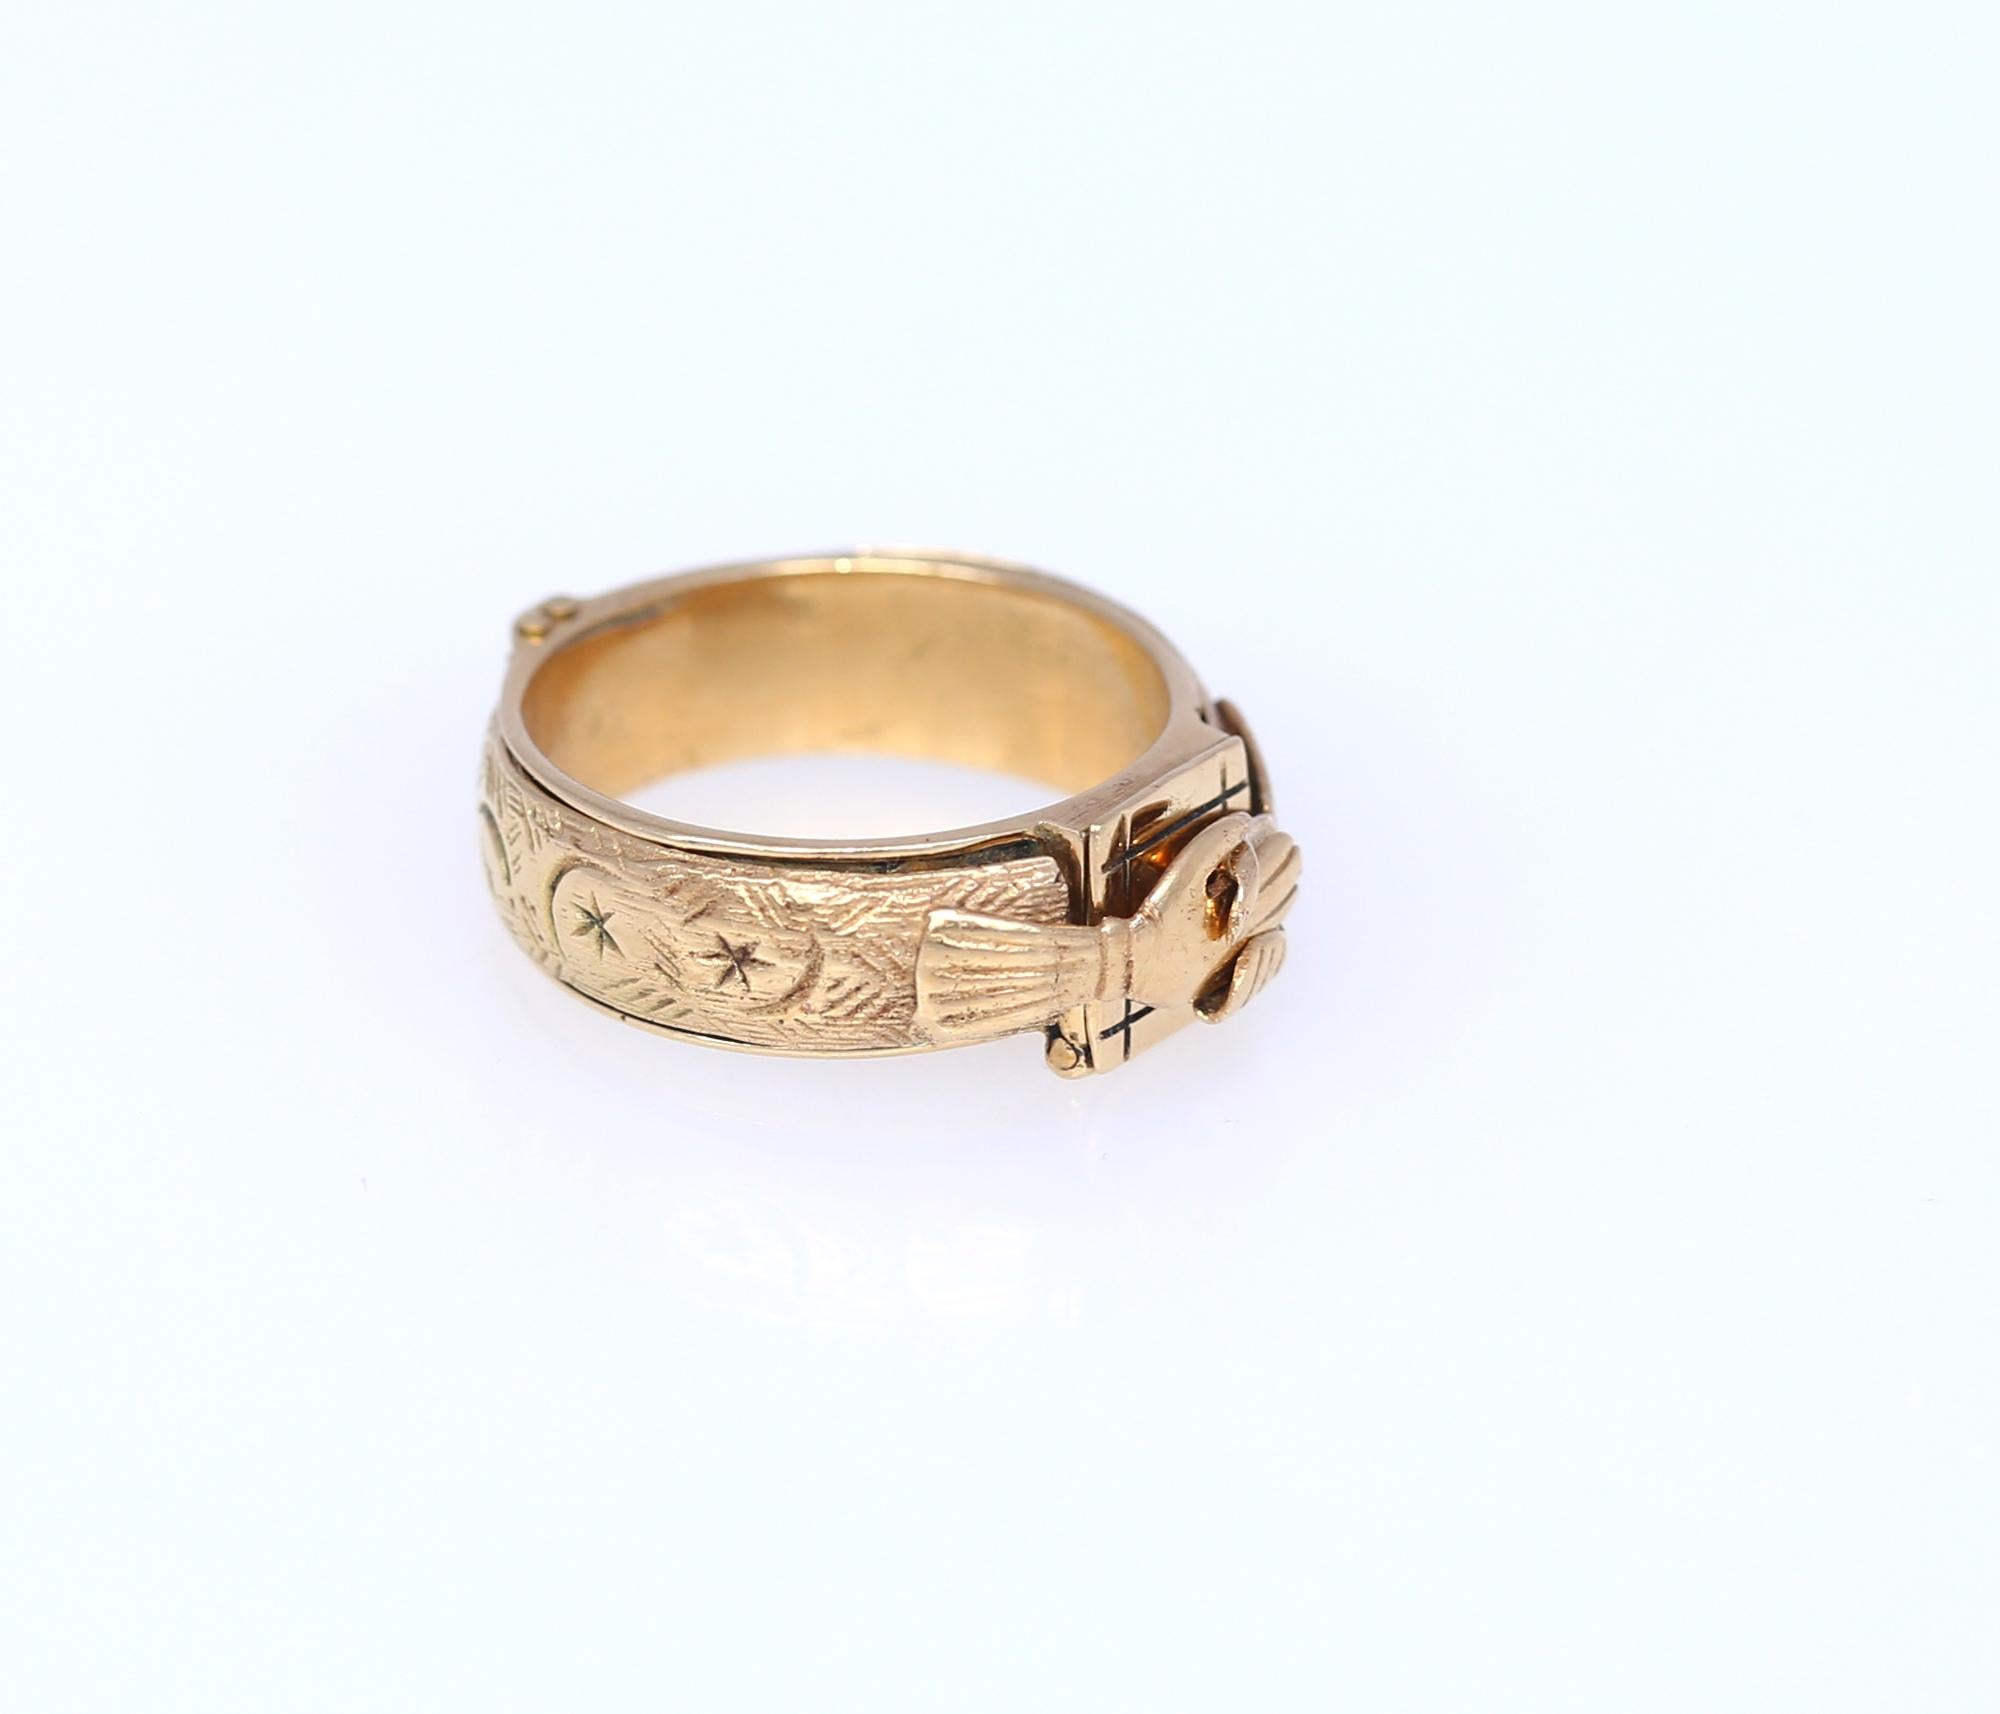 Judaic Engagement 18K Gold Ring with a Secret. The handshake opens to reveal the small secret compartment that was used for perfumed cloth or a hair curl of a loved one.
The inscription is visible only when the “hands” are open. In Hebrew says Mazal